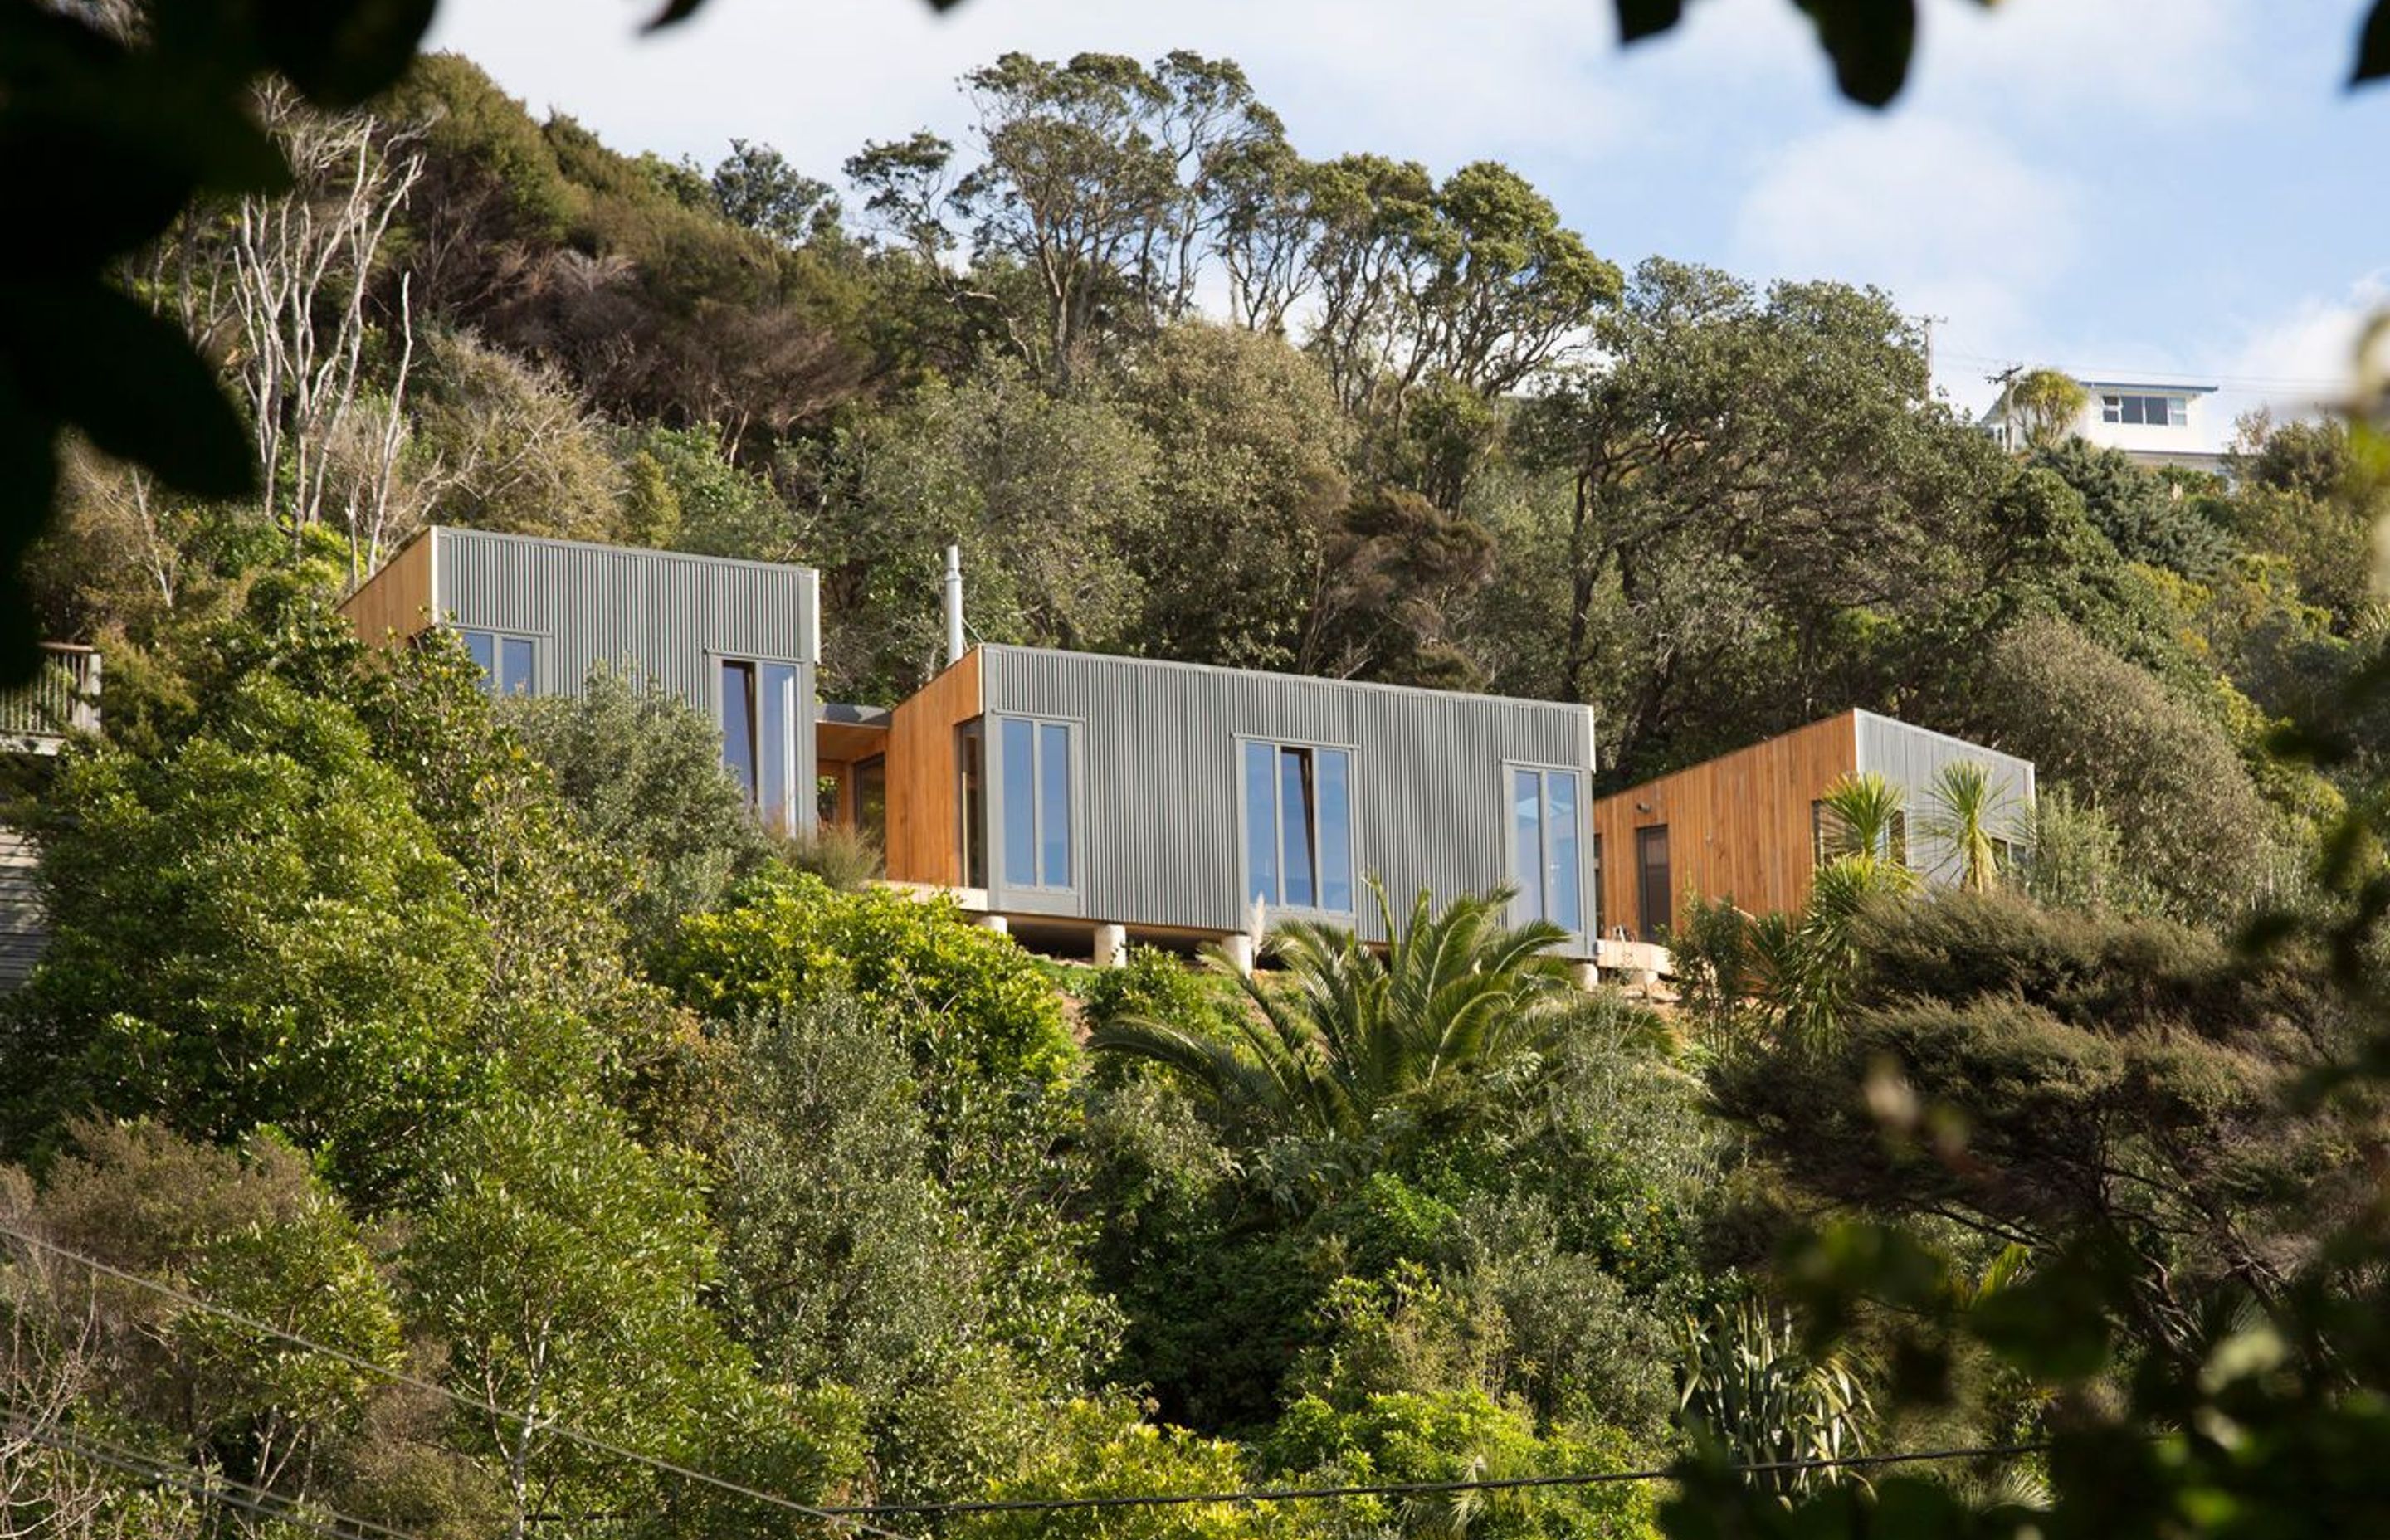 Cora House on Waiheke Island, was designed by Bonnifait + Giesen to suit a coastal environment prone to unpredictable weather with a protective facade and slim windows, connected by decks for sitting out on sunny days. Photograph by Russell Kleyn.